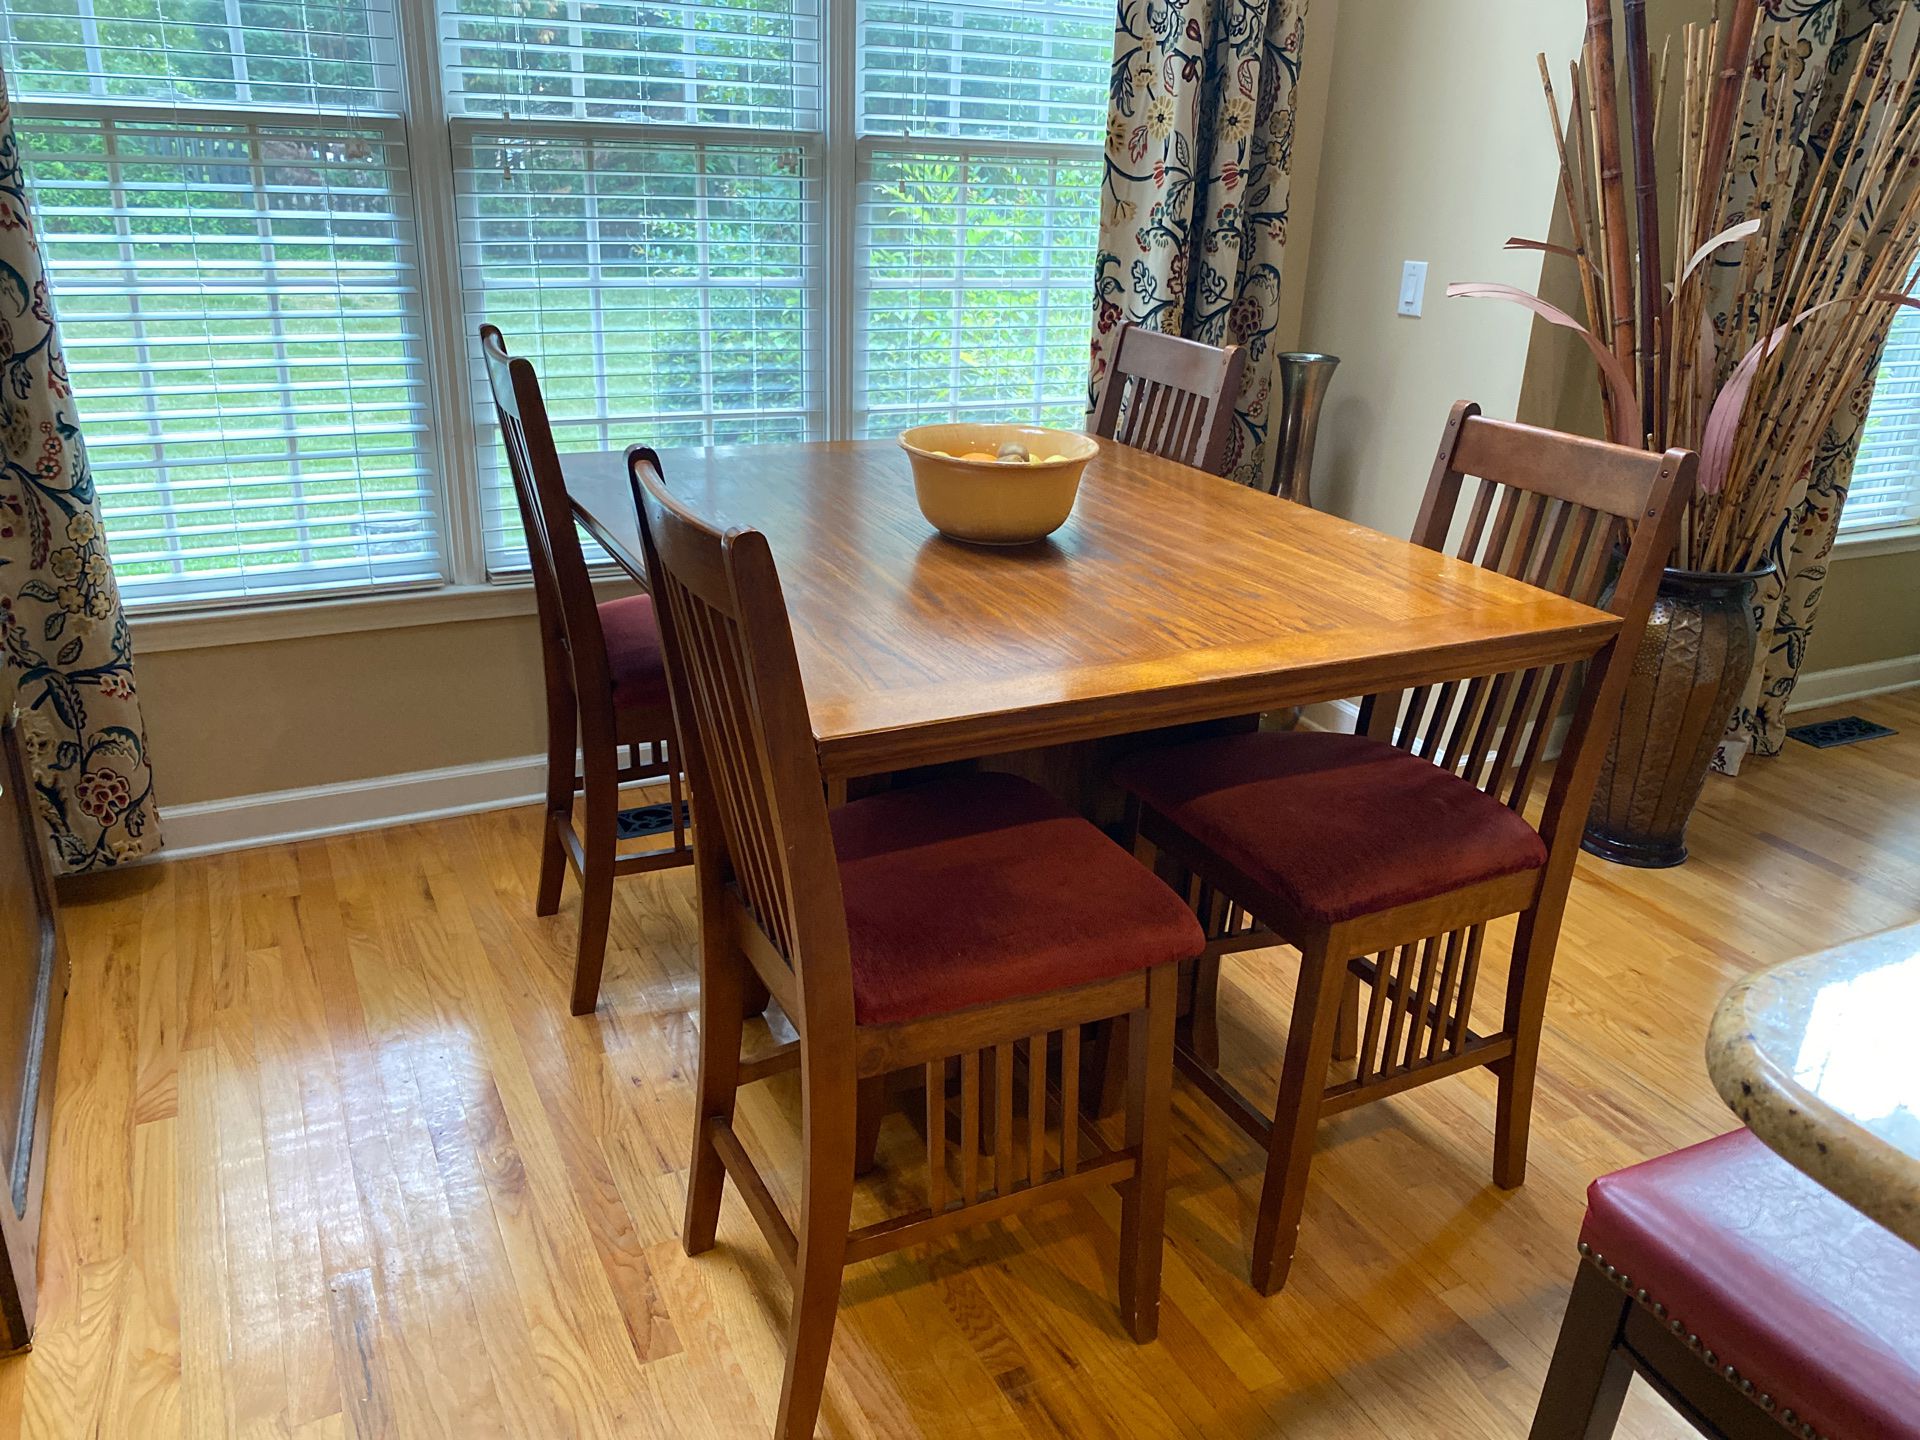 Solid wood kitchen table and chairs